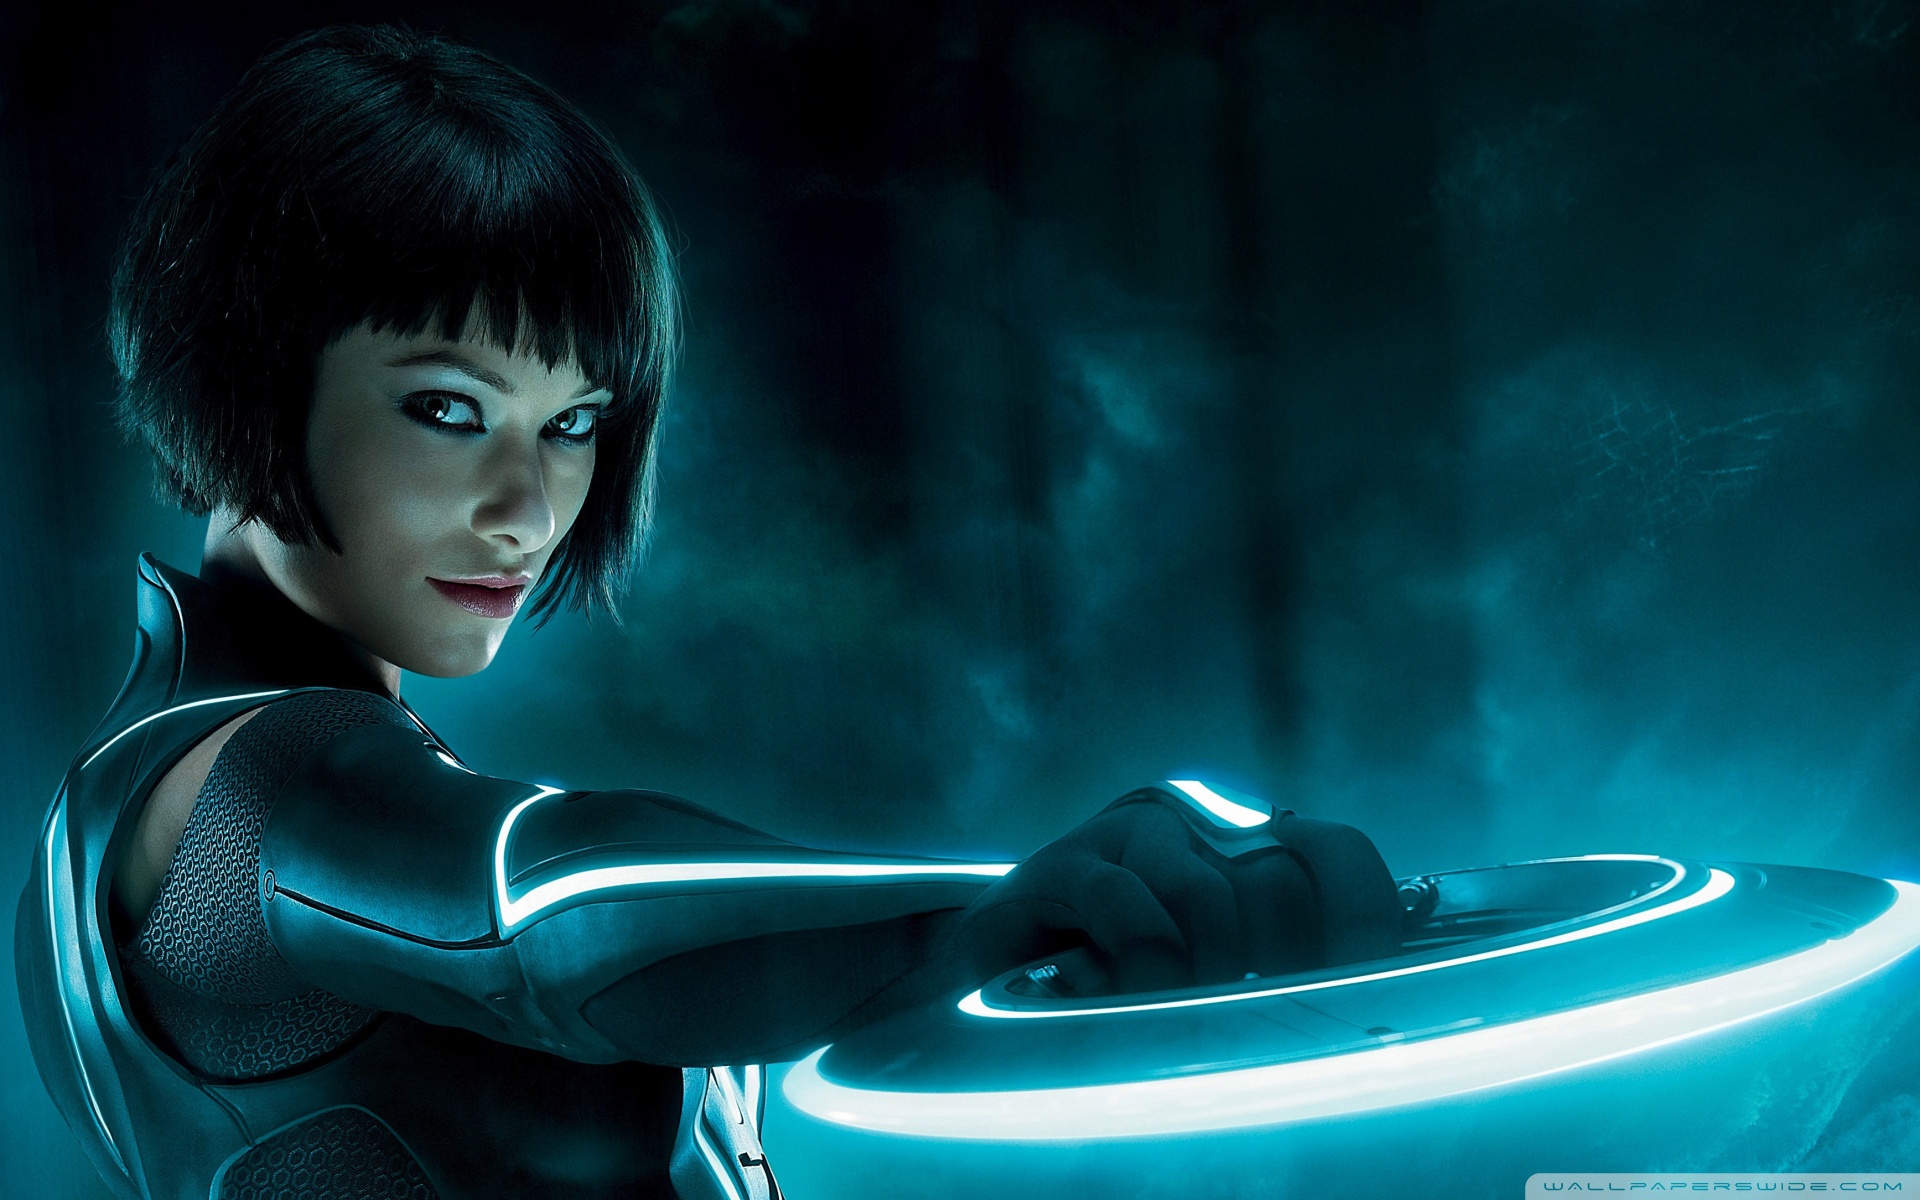 tron legacy full movie online free no download